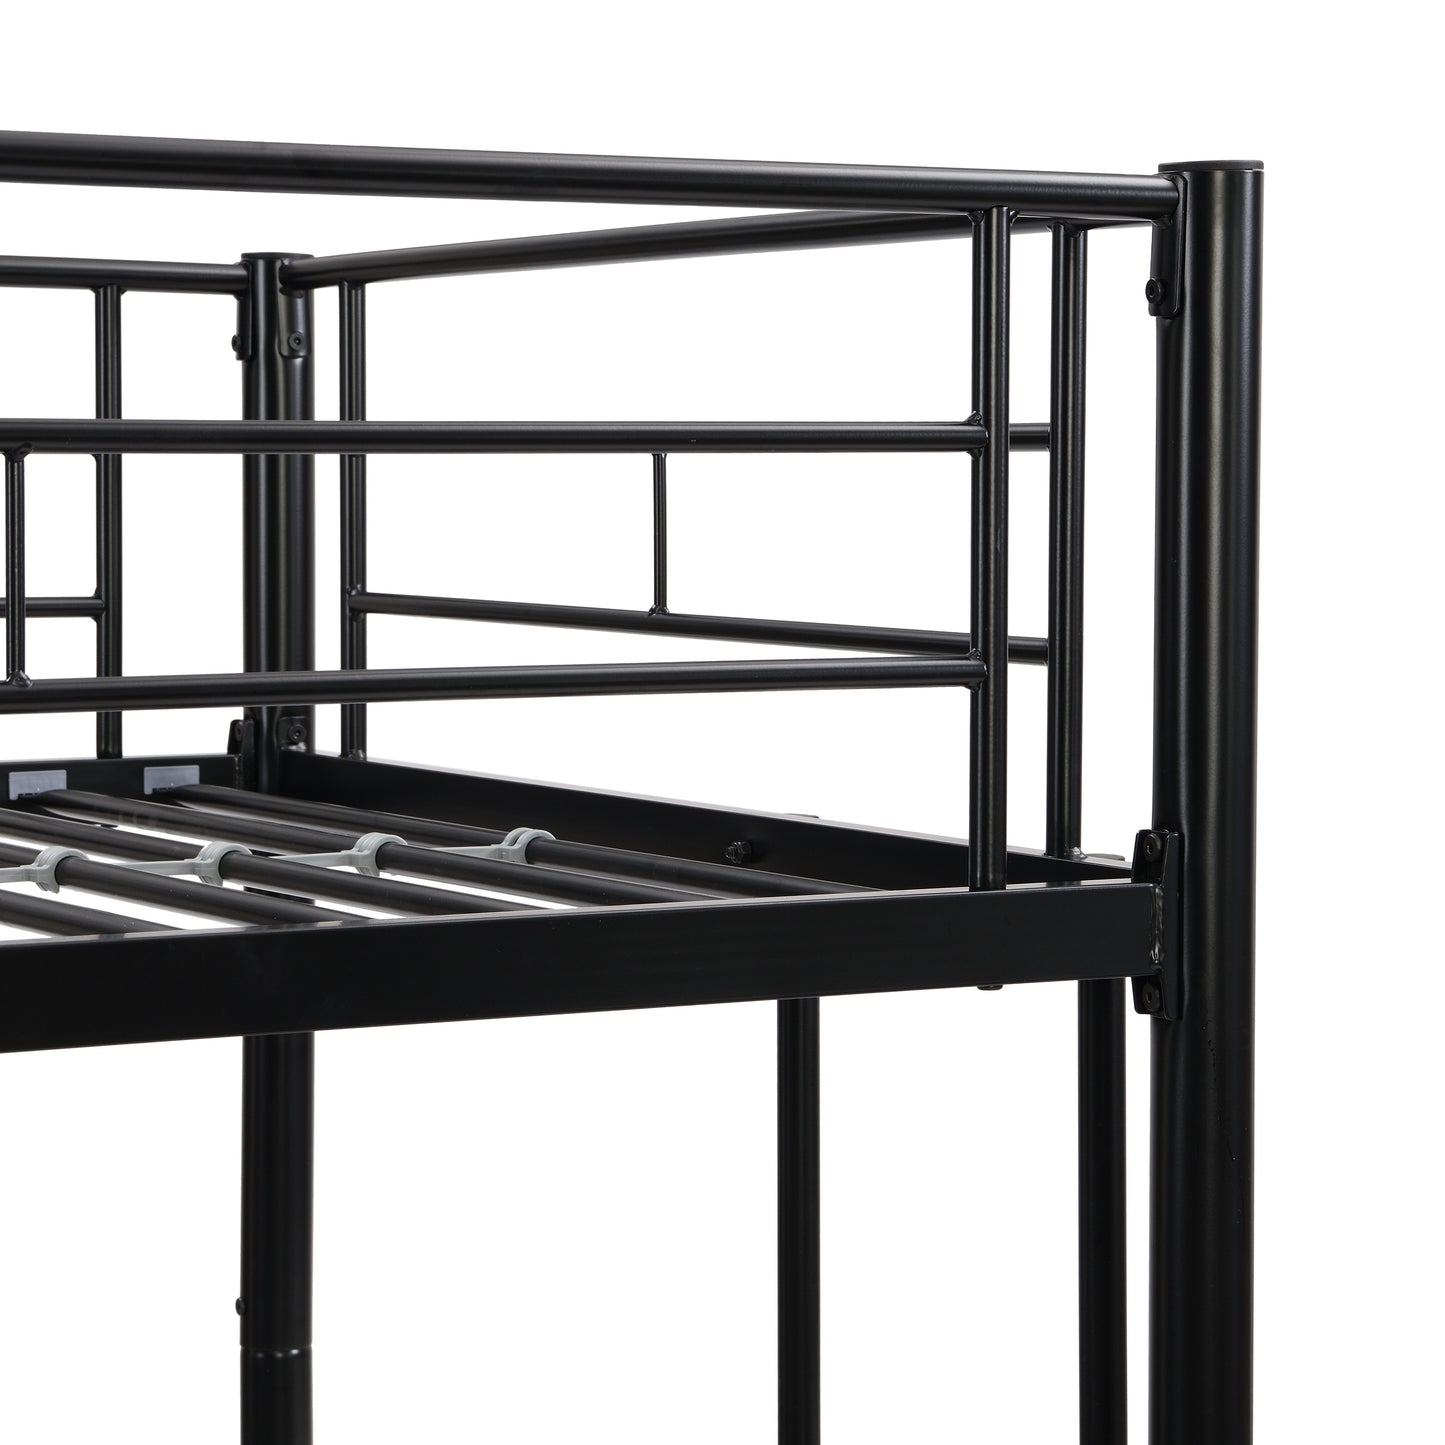 Bunk Bed Twin Over Twin Size with 2 Ladders and Full-Length Guardrail, Metal, Storage Space, No Box Spring Needed, Noise Free, Black